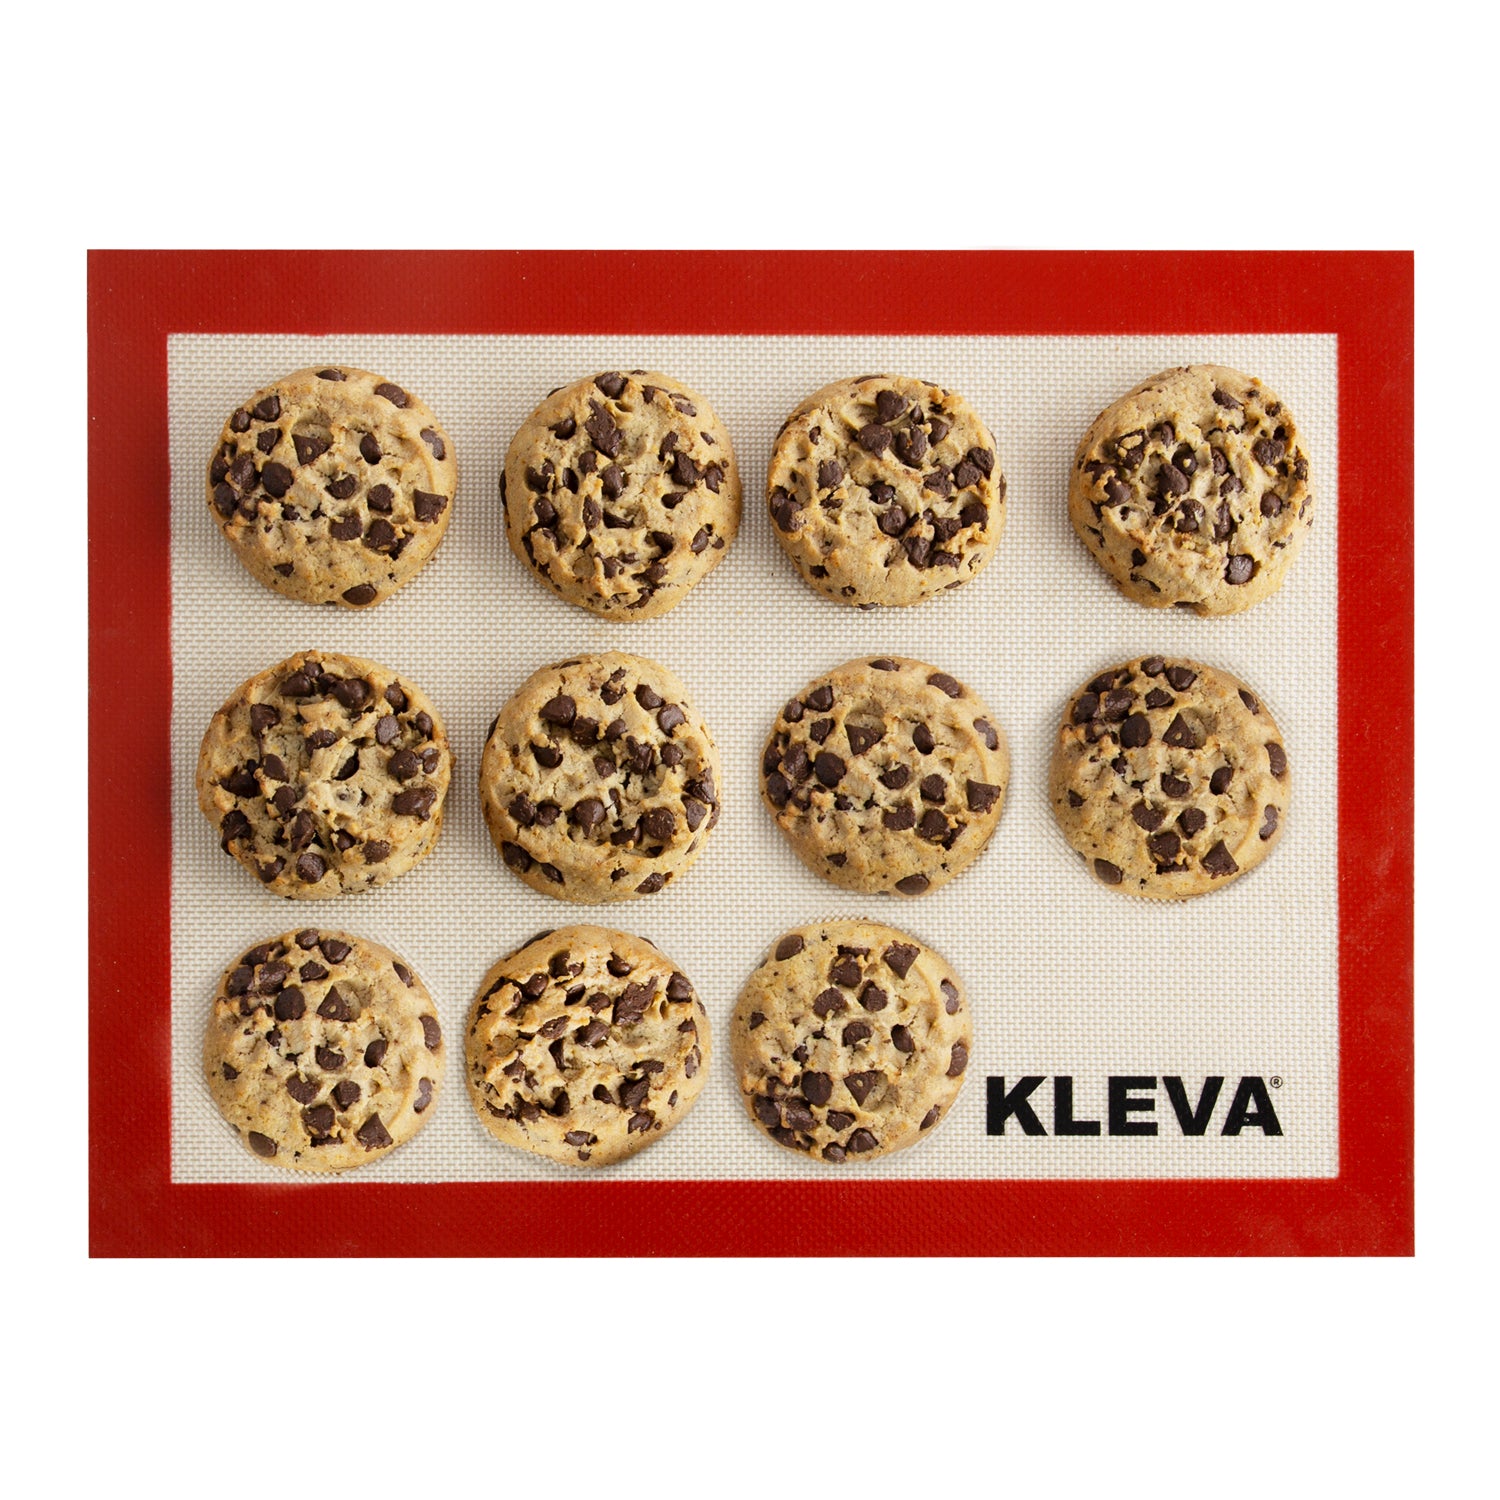 Silicone Baking Mat - Bake, Cook & Clean Easier With No Fats Or Oils! Kitchen Gadget Kleva Range   